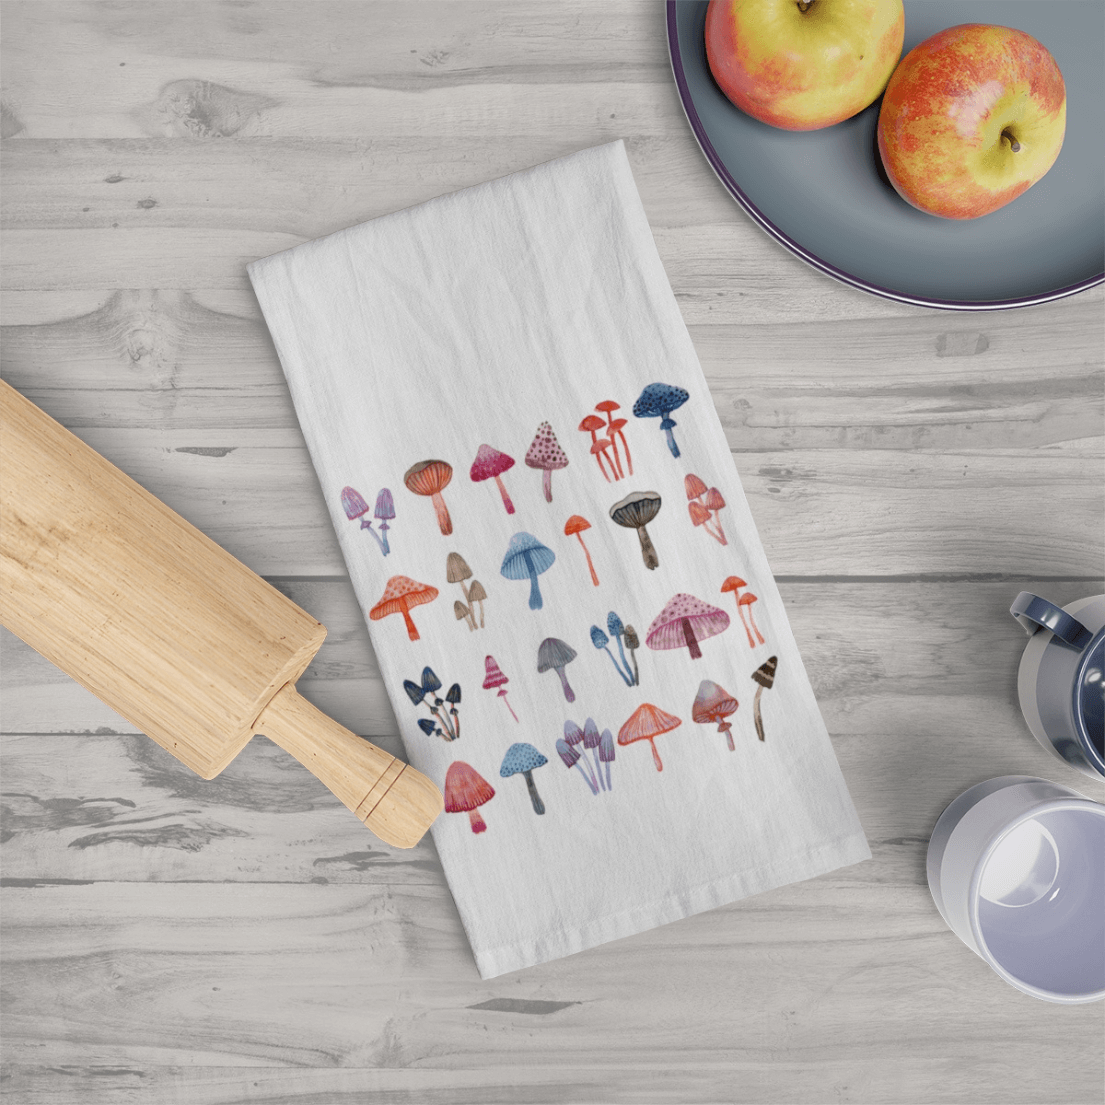 kitchen towel with mushrooms on it